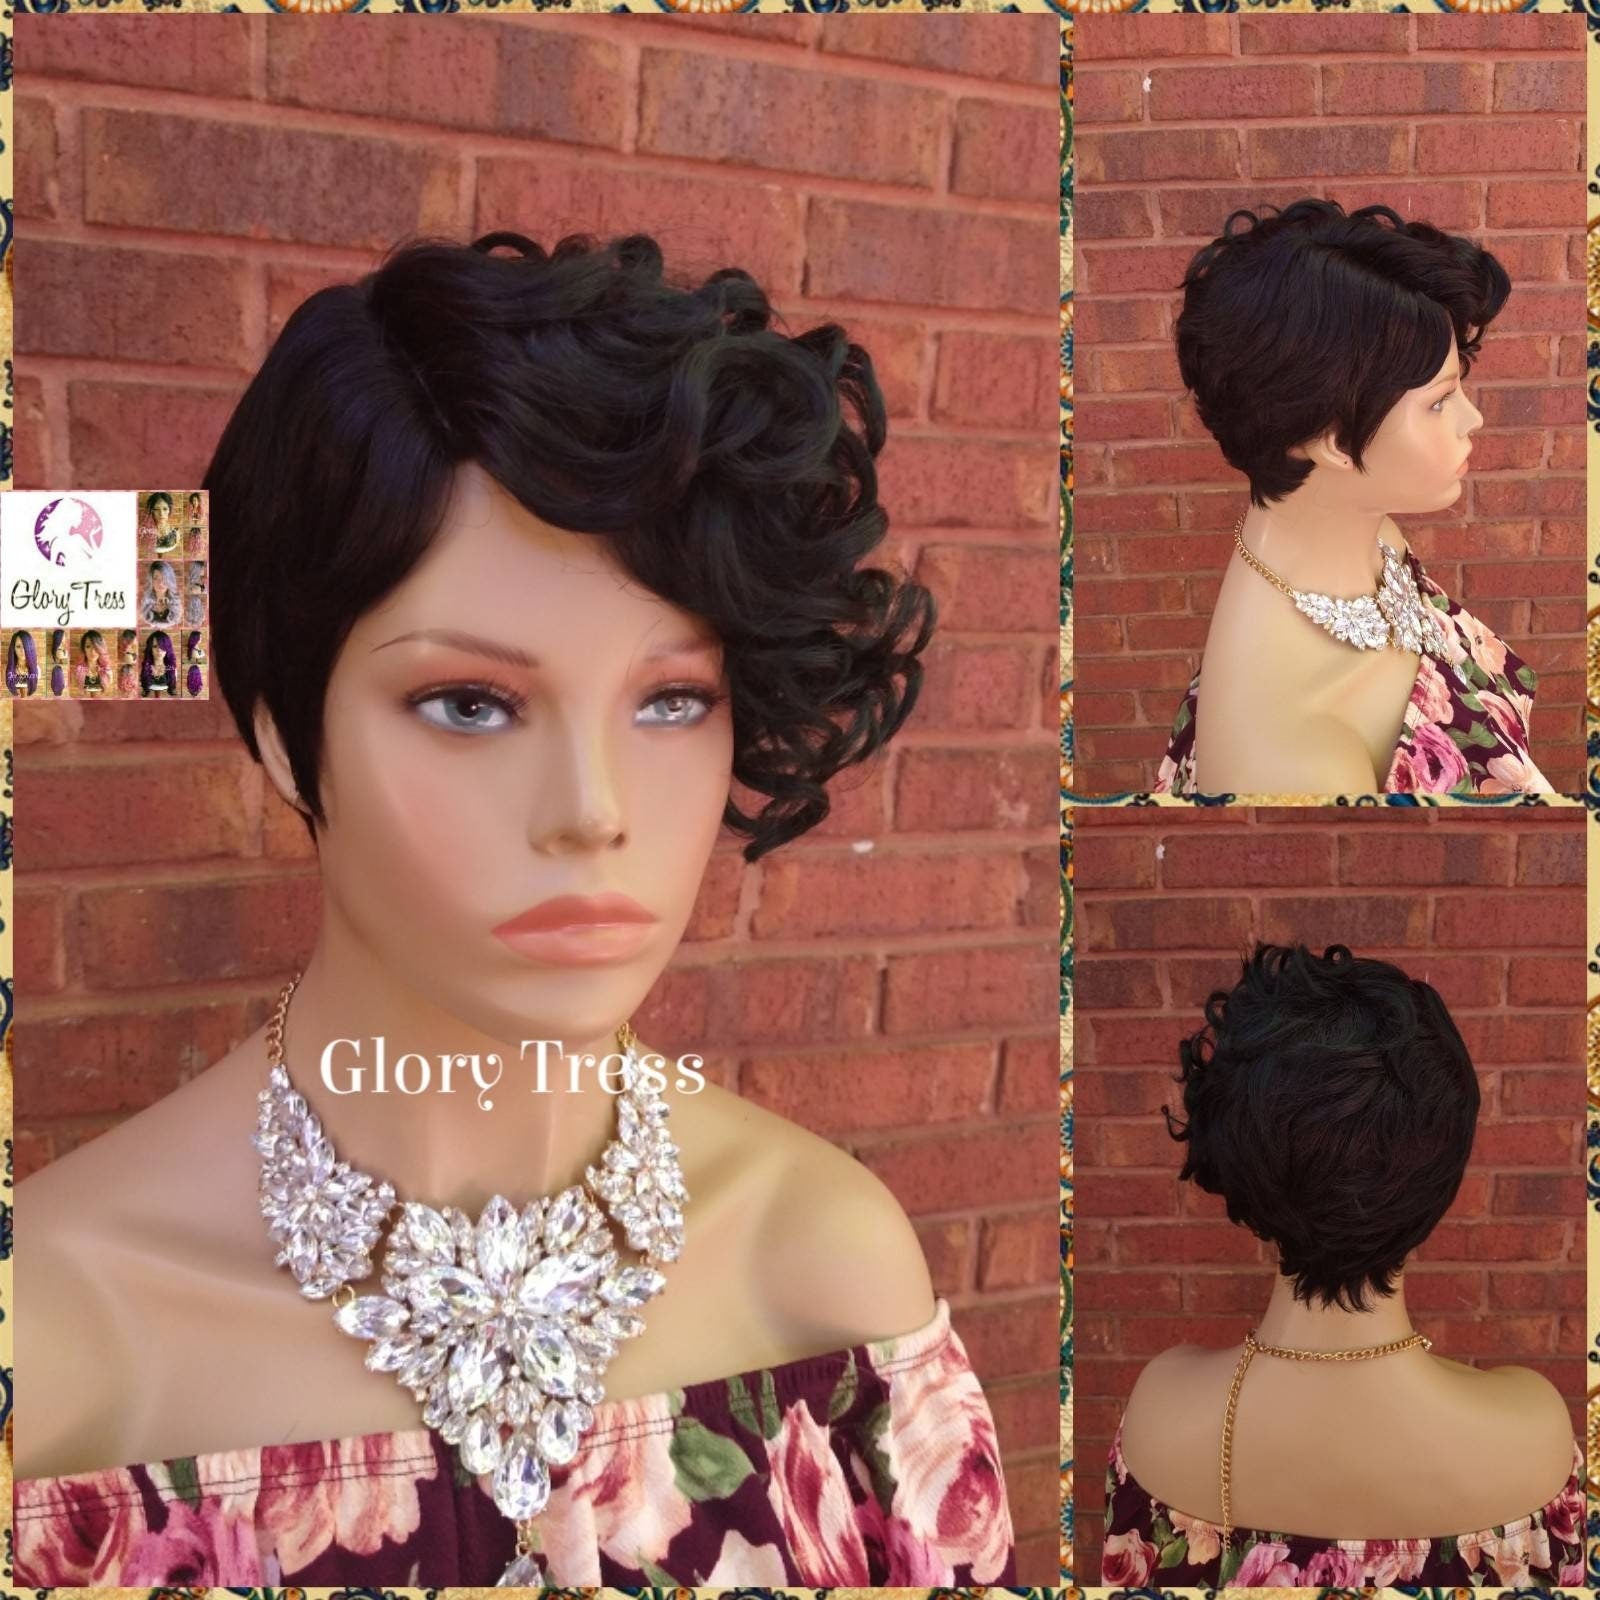 Short Razor Cut Full Wig, Pixie Cut Hairstyle With Long Side Bangs, Ombre Dark Green Wi, Glory Tress, Lace Side Part //REVIVE